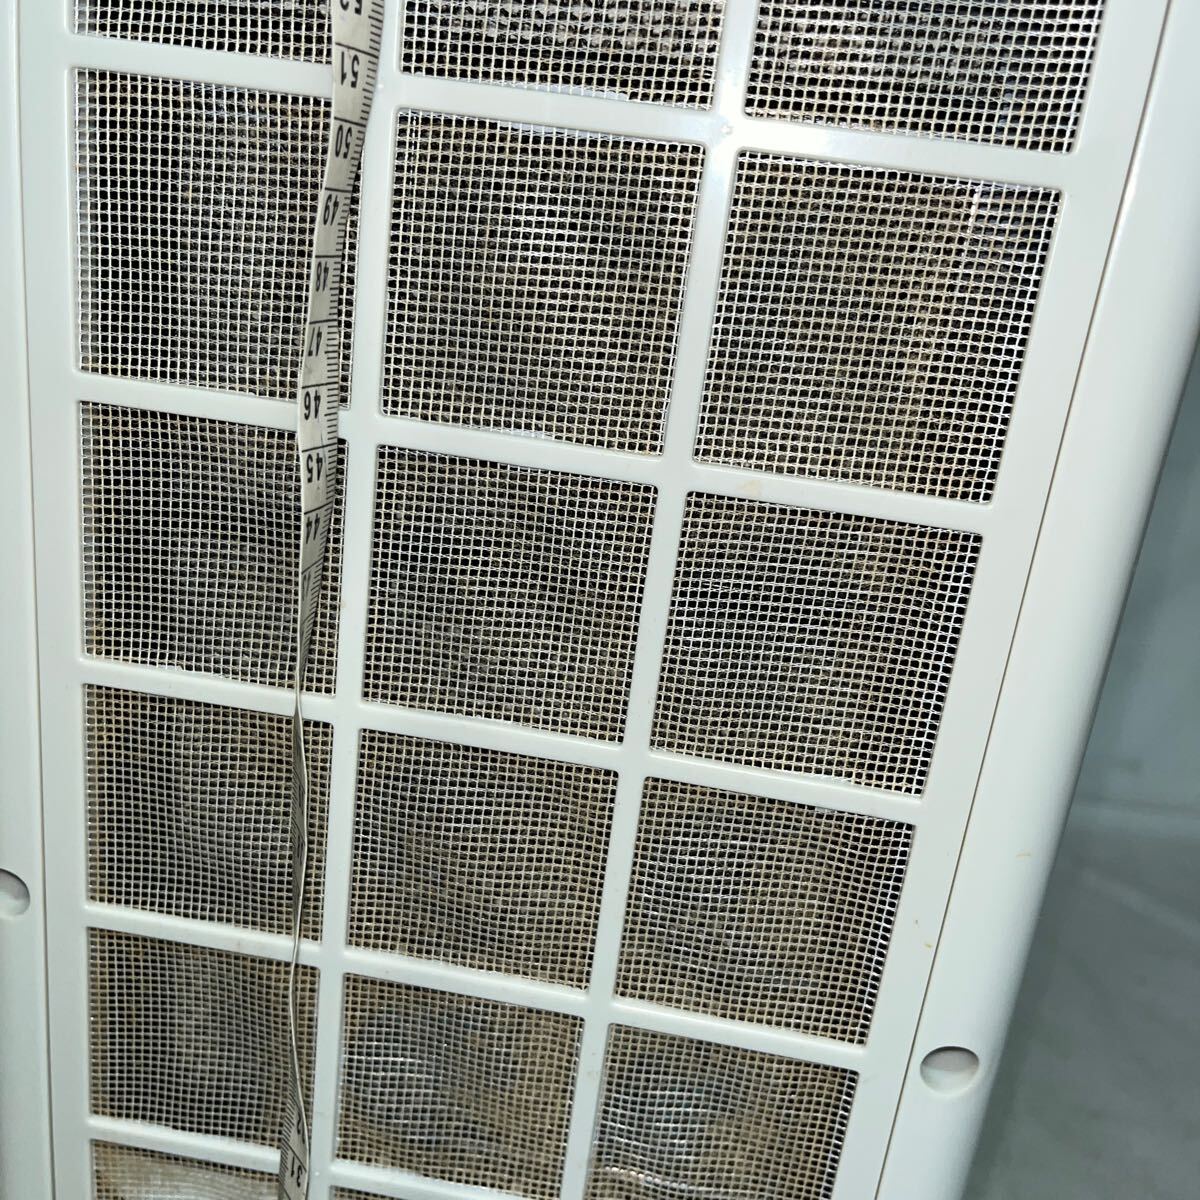 [ junk ] cold air fan slim type TCW-010.2015 year made,( stock ) thousand .